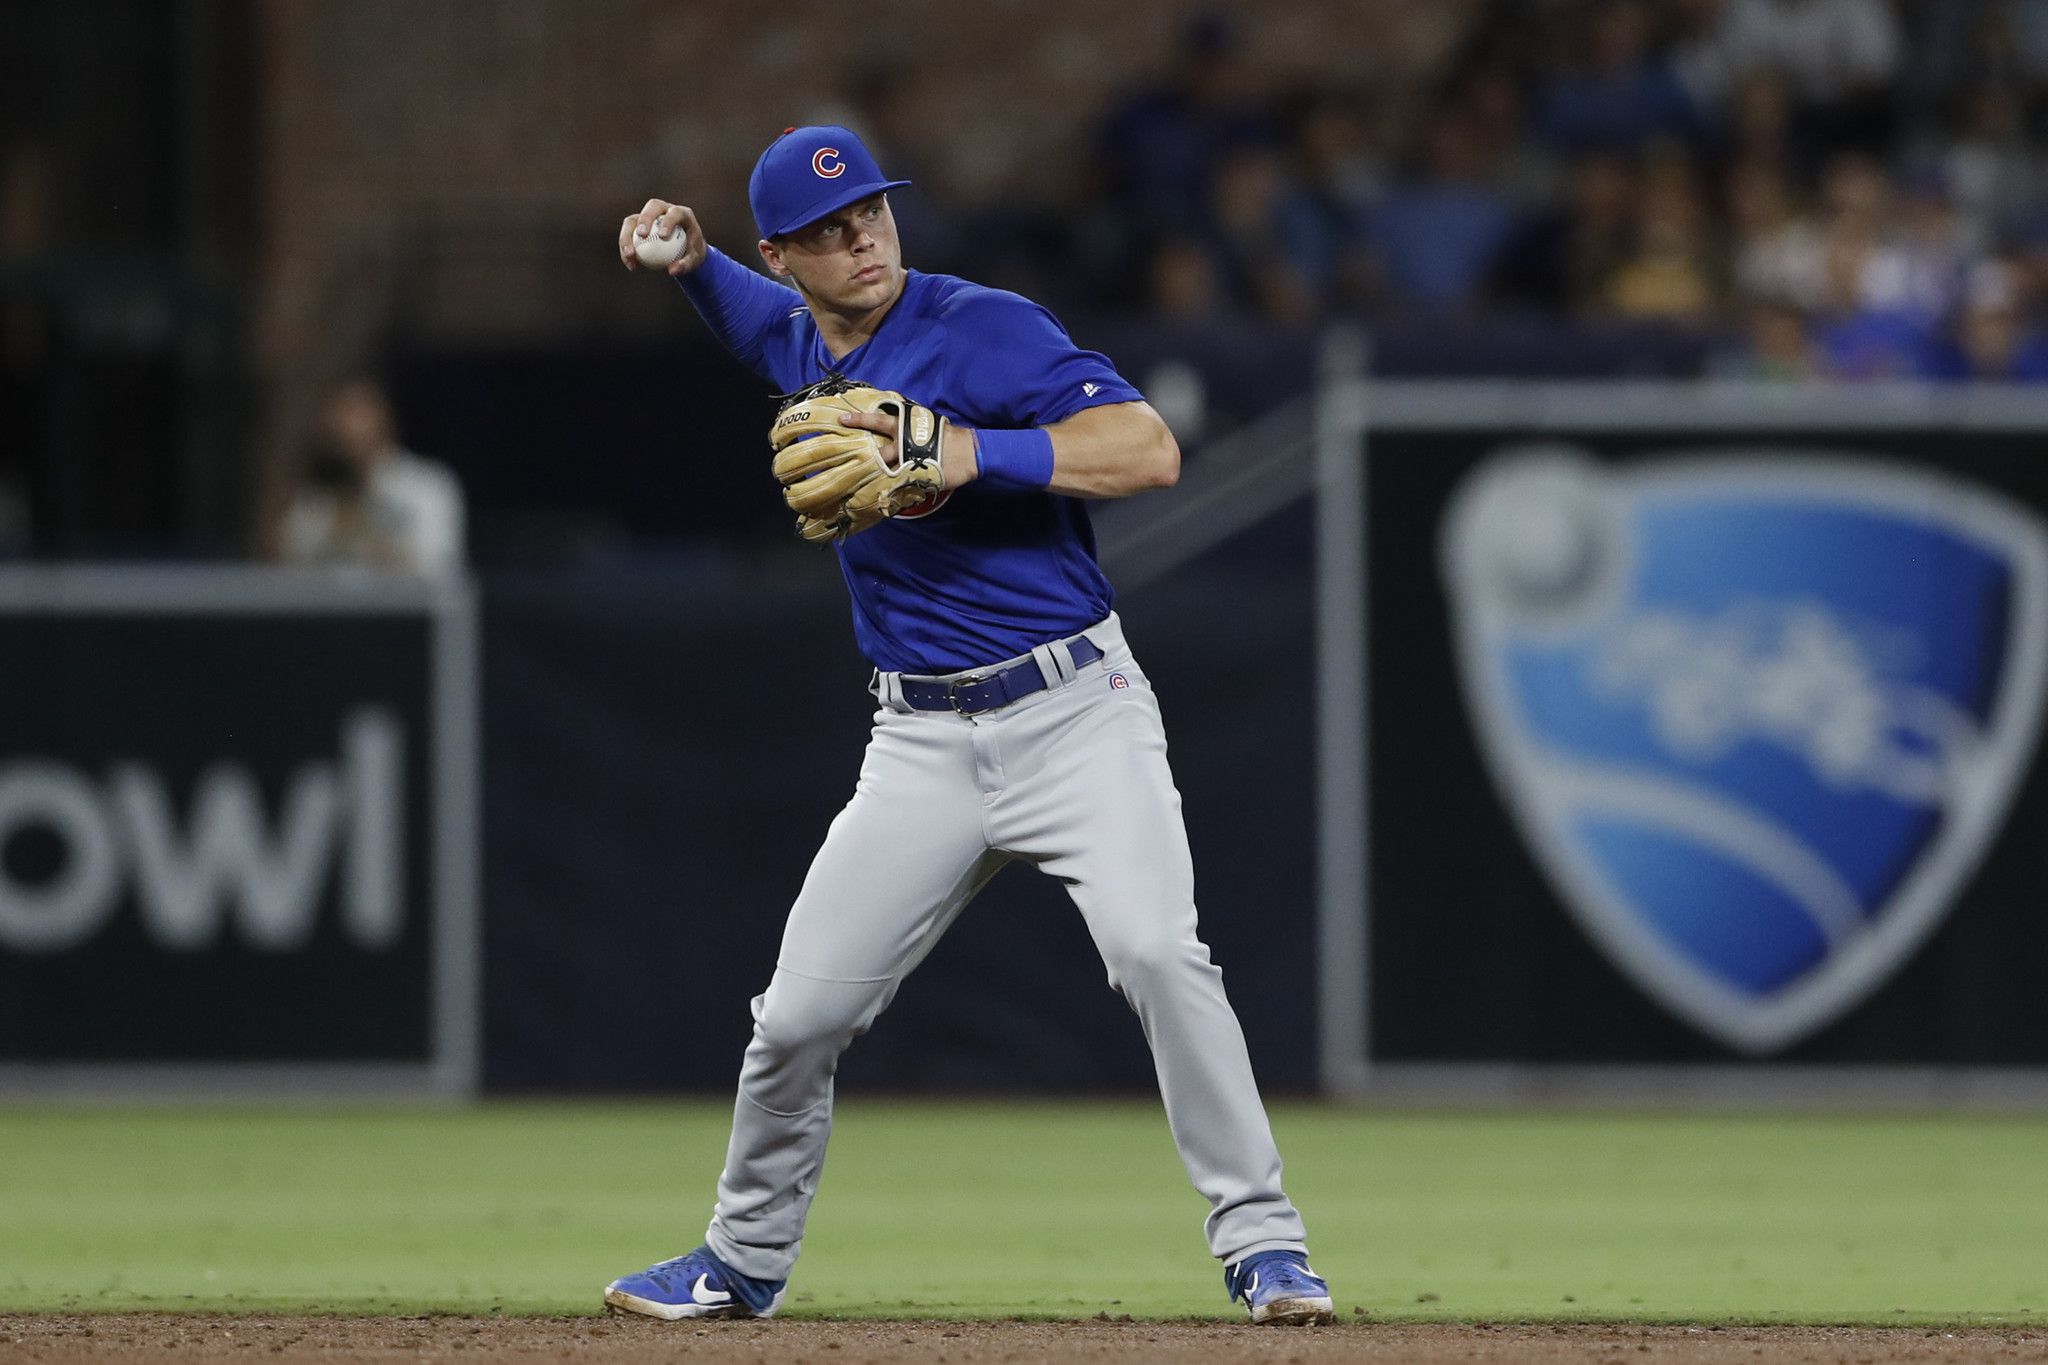 Cubs shortstop Nico Hoerner snubbed as a Gold Glove finalist